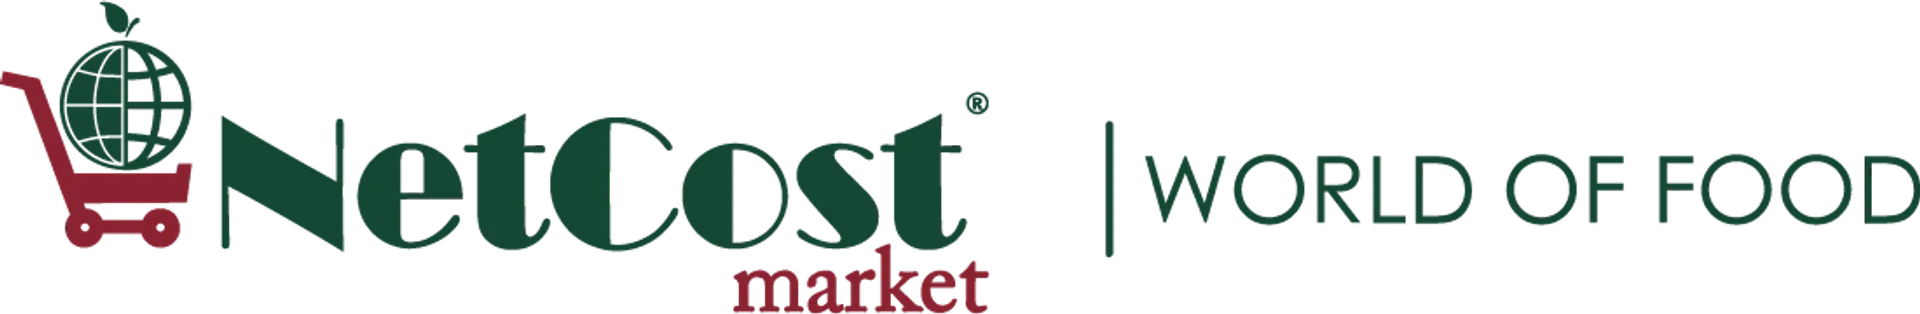 NETCOST MARKET logo current weekly ad